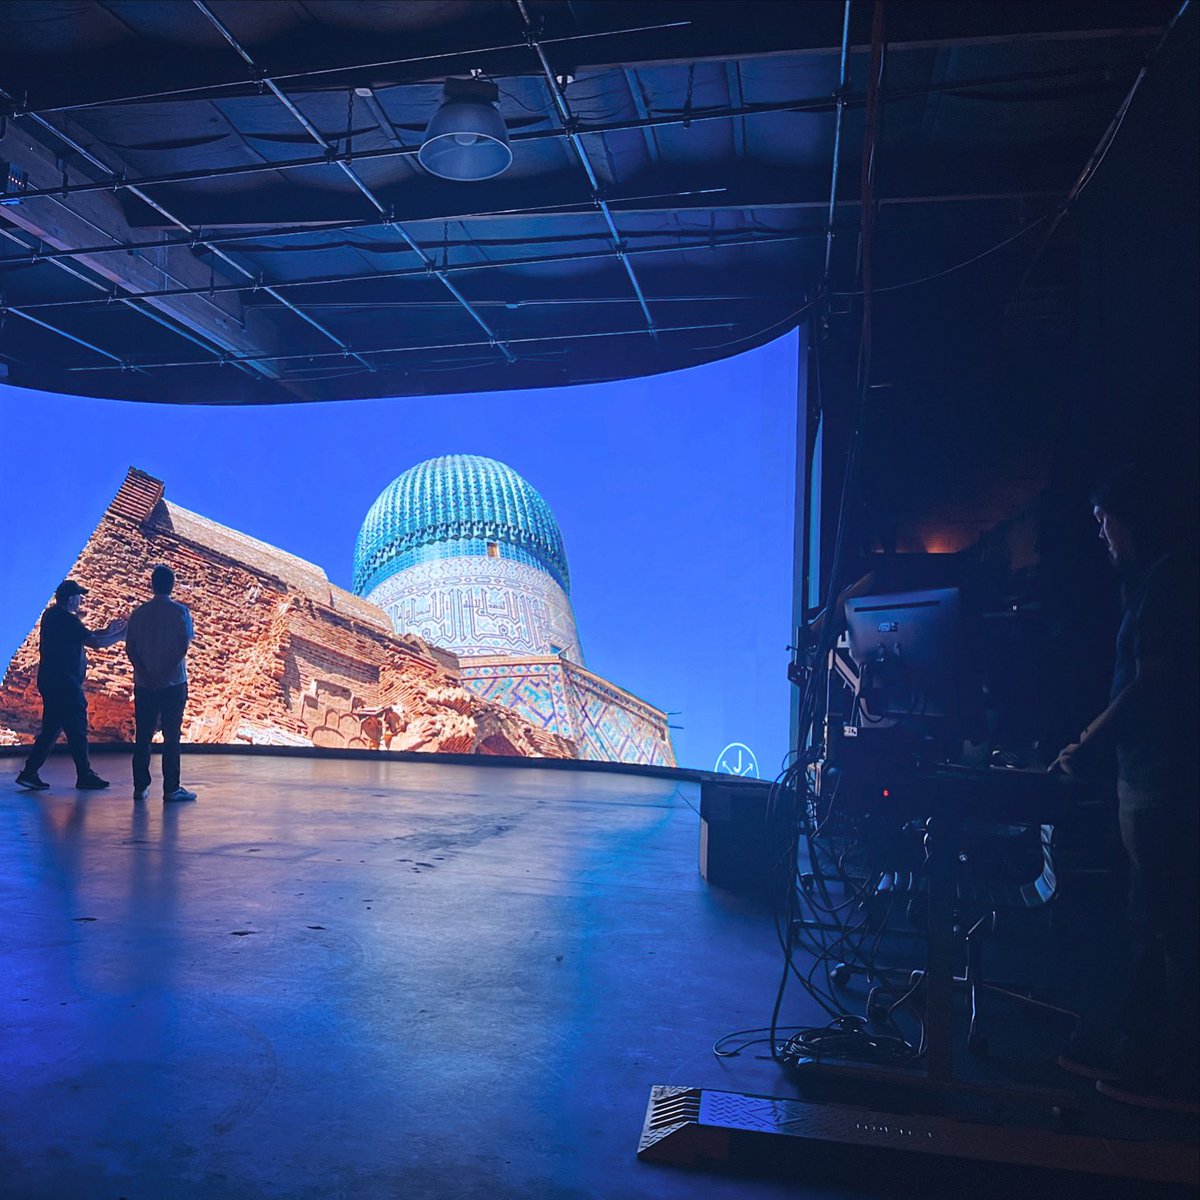 Anywhere you need to go, the wall can take you. Creators: click the link in our bio and book a stage today. #LEDwall #LEDVolume #ICVFX #Studio #Directors